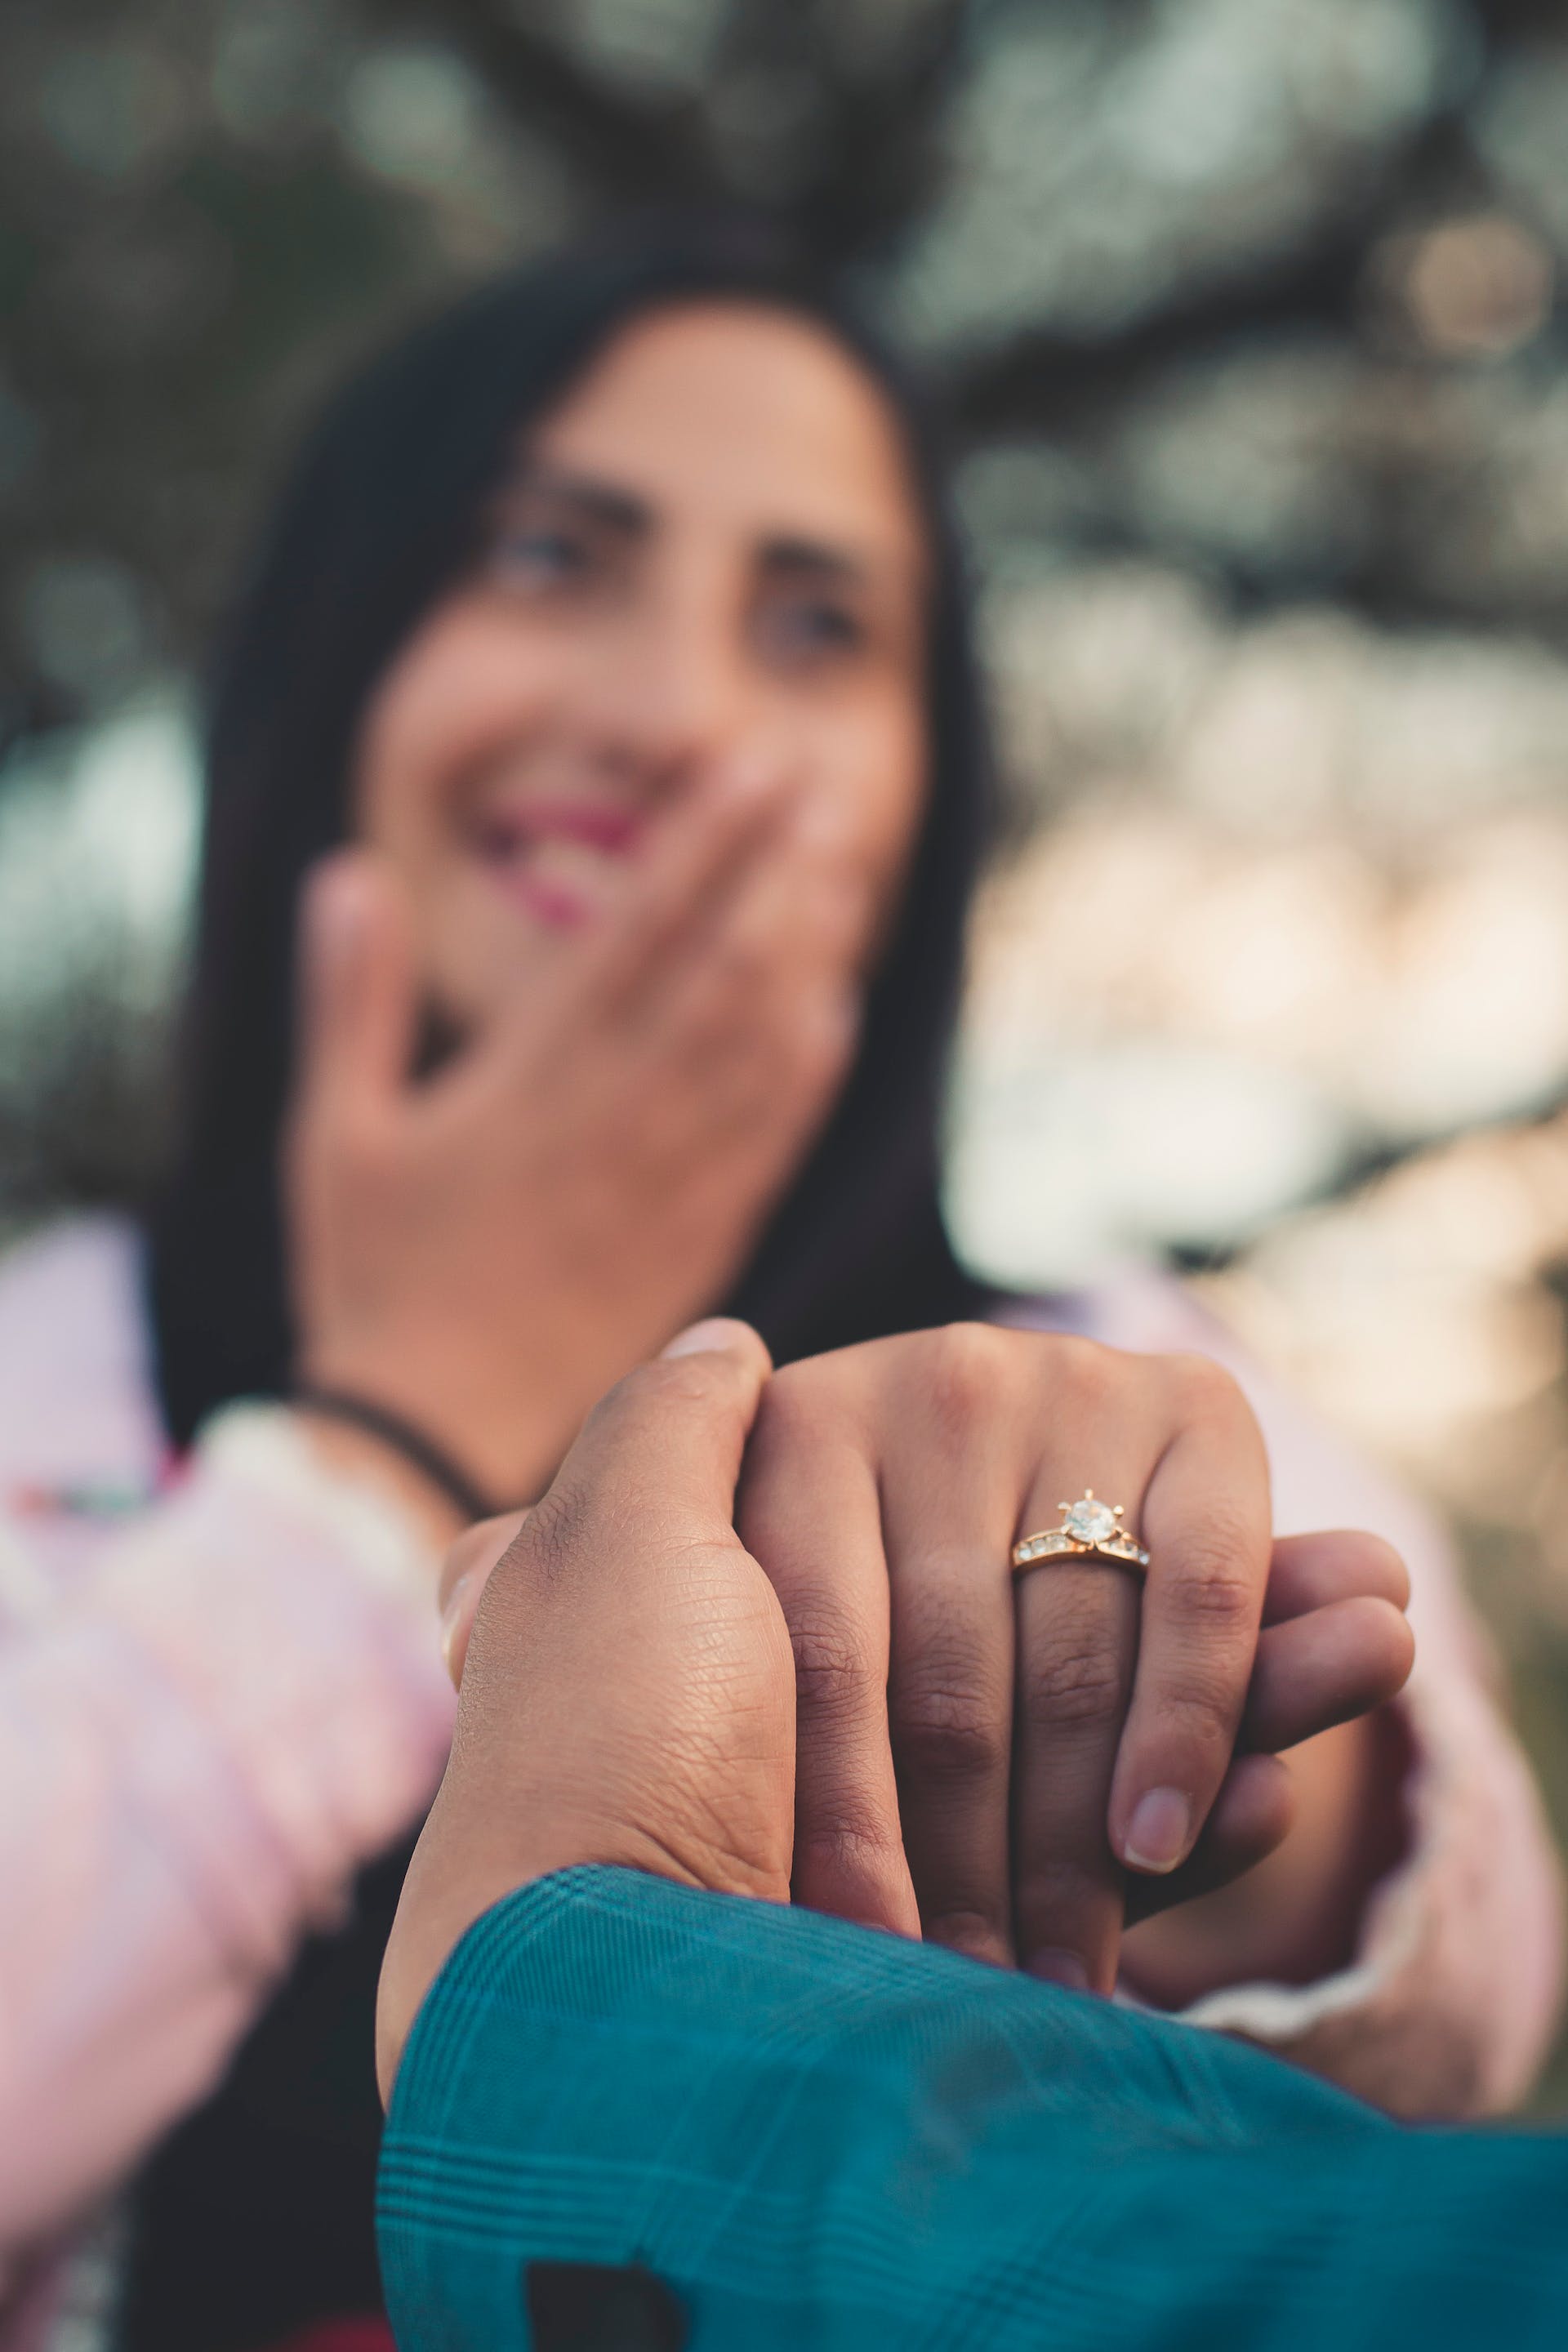 Woman showing off her engagement ring | Source: Pexels